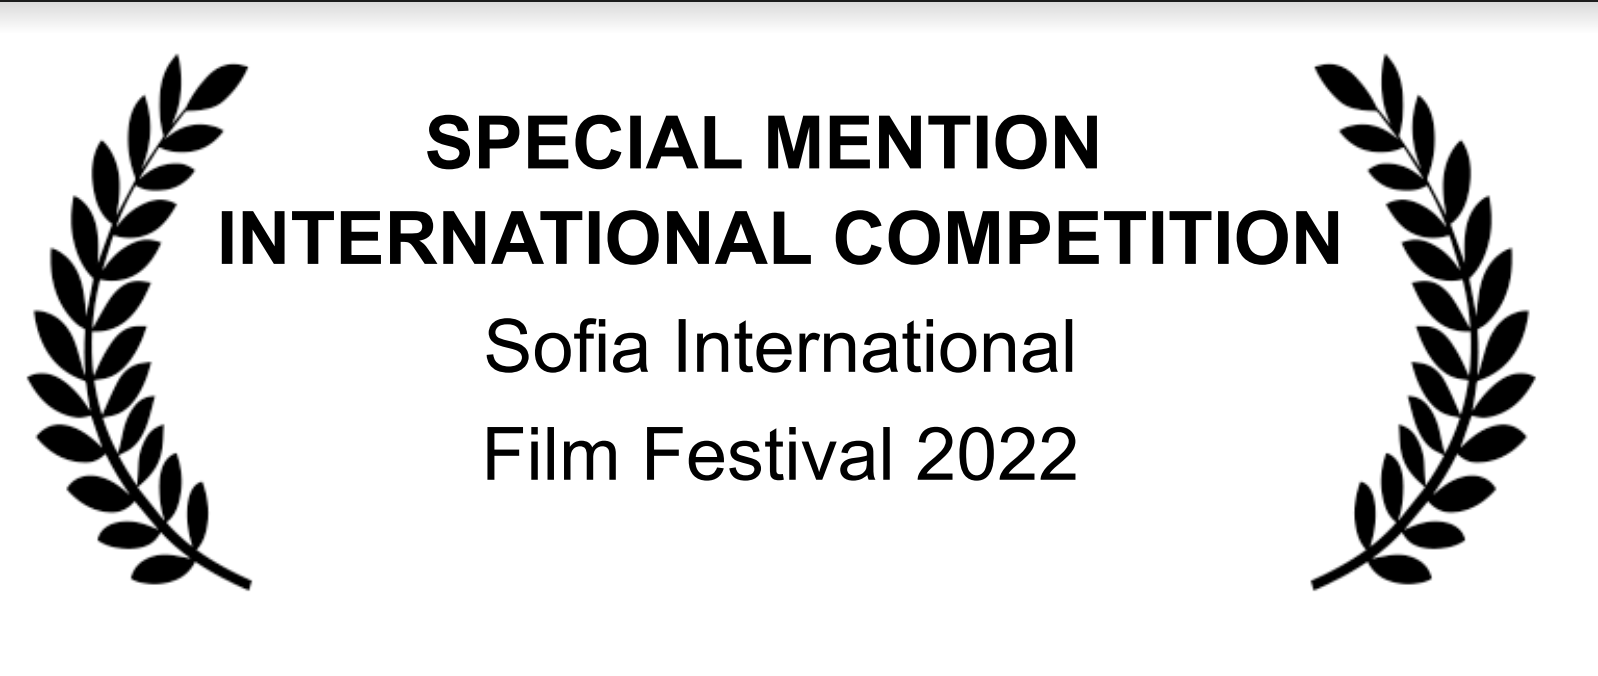 Sofia IFF - International Competition - Special Mention